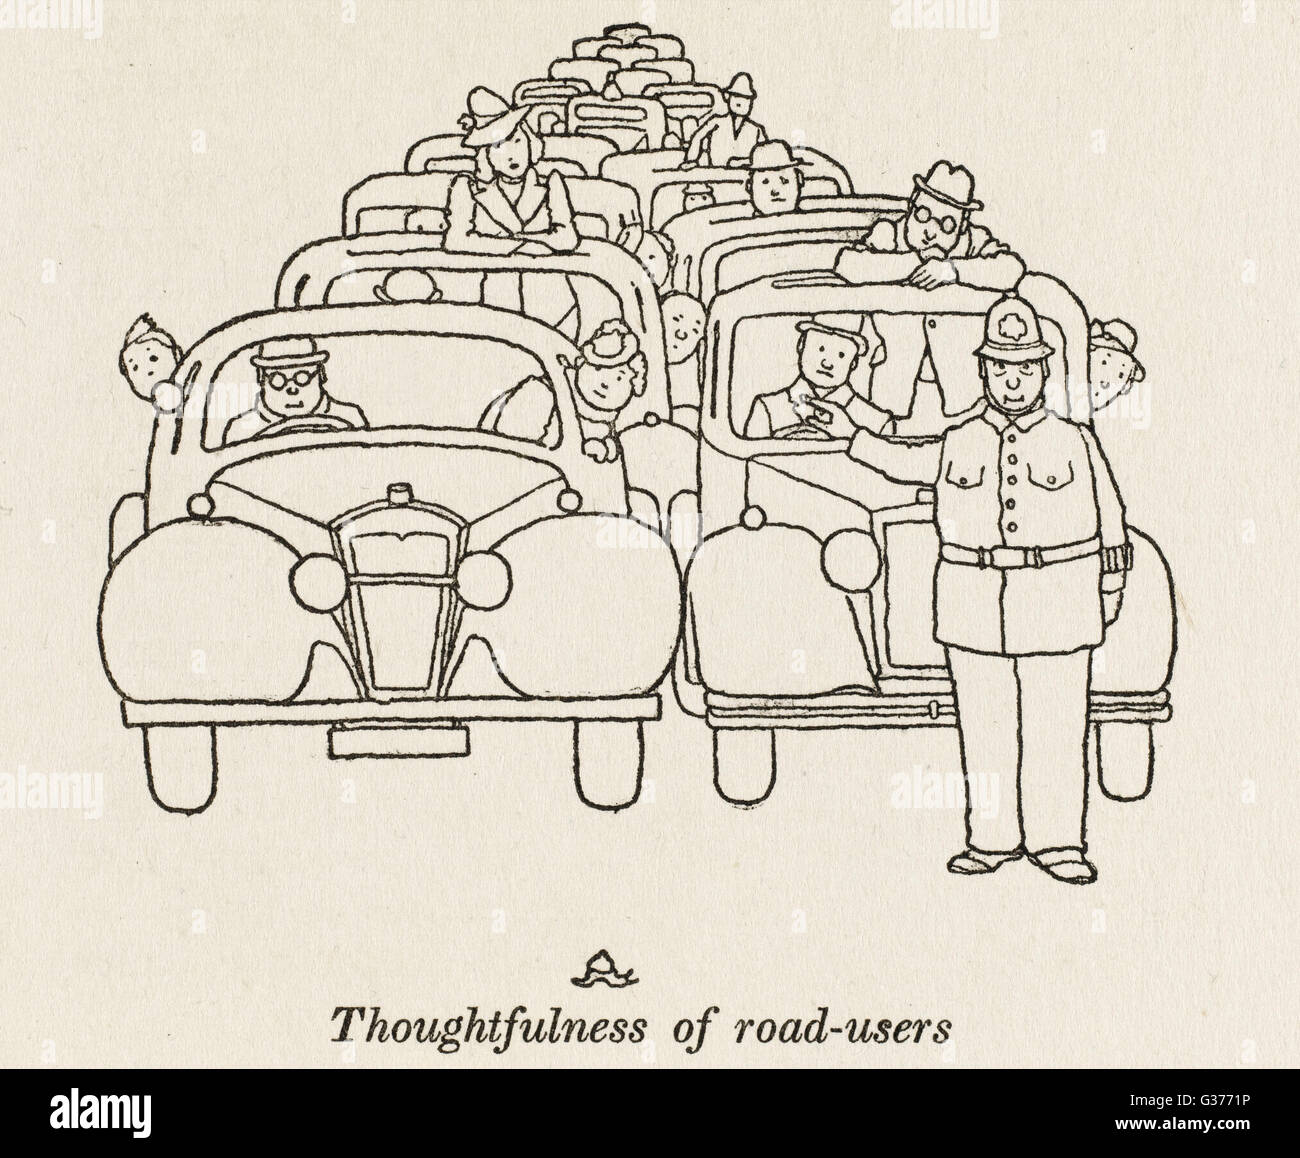 Thoughtfulness of road-users Stock Photo